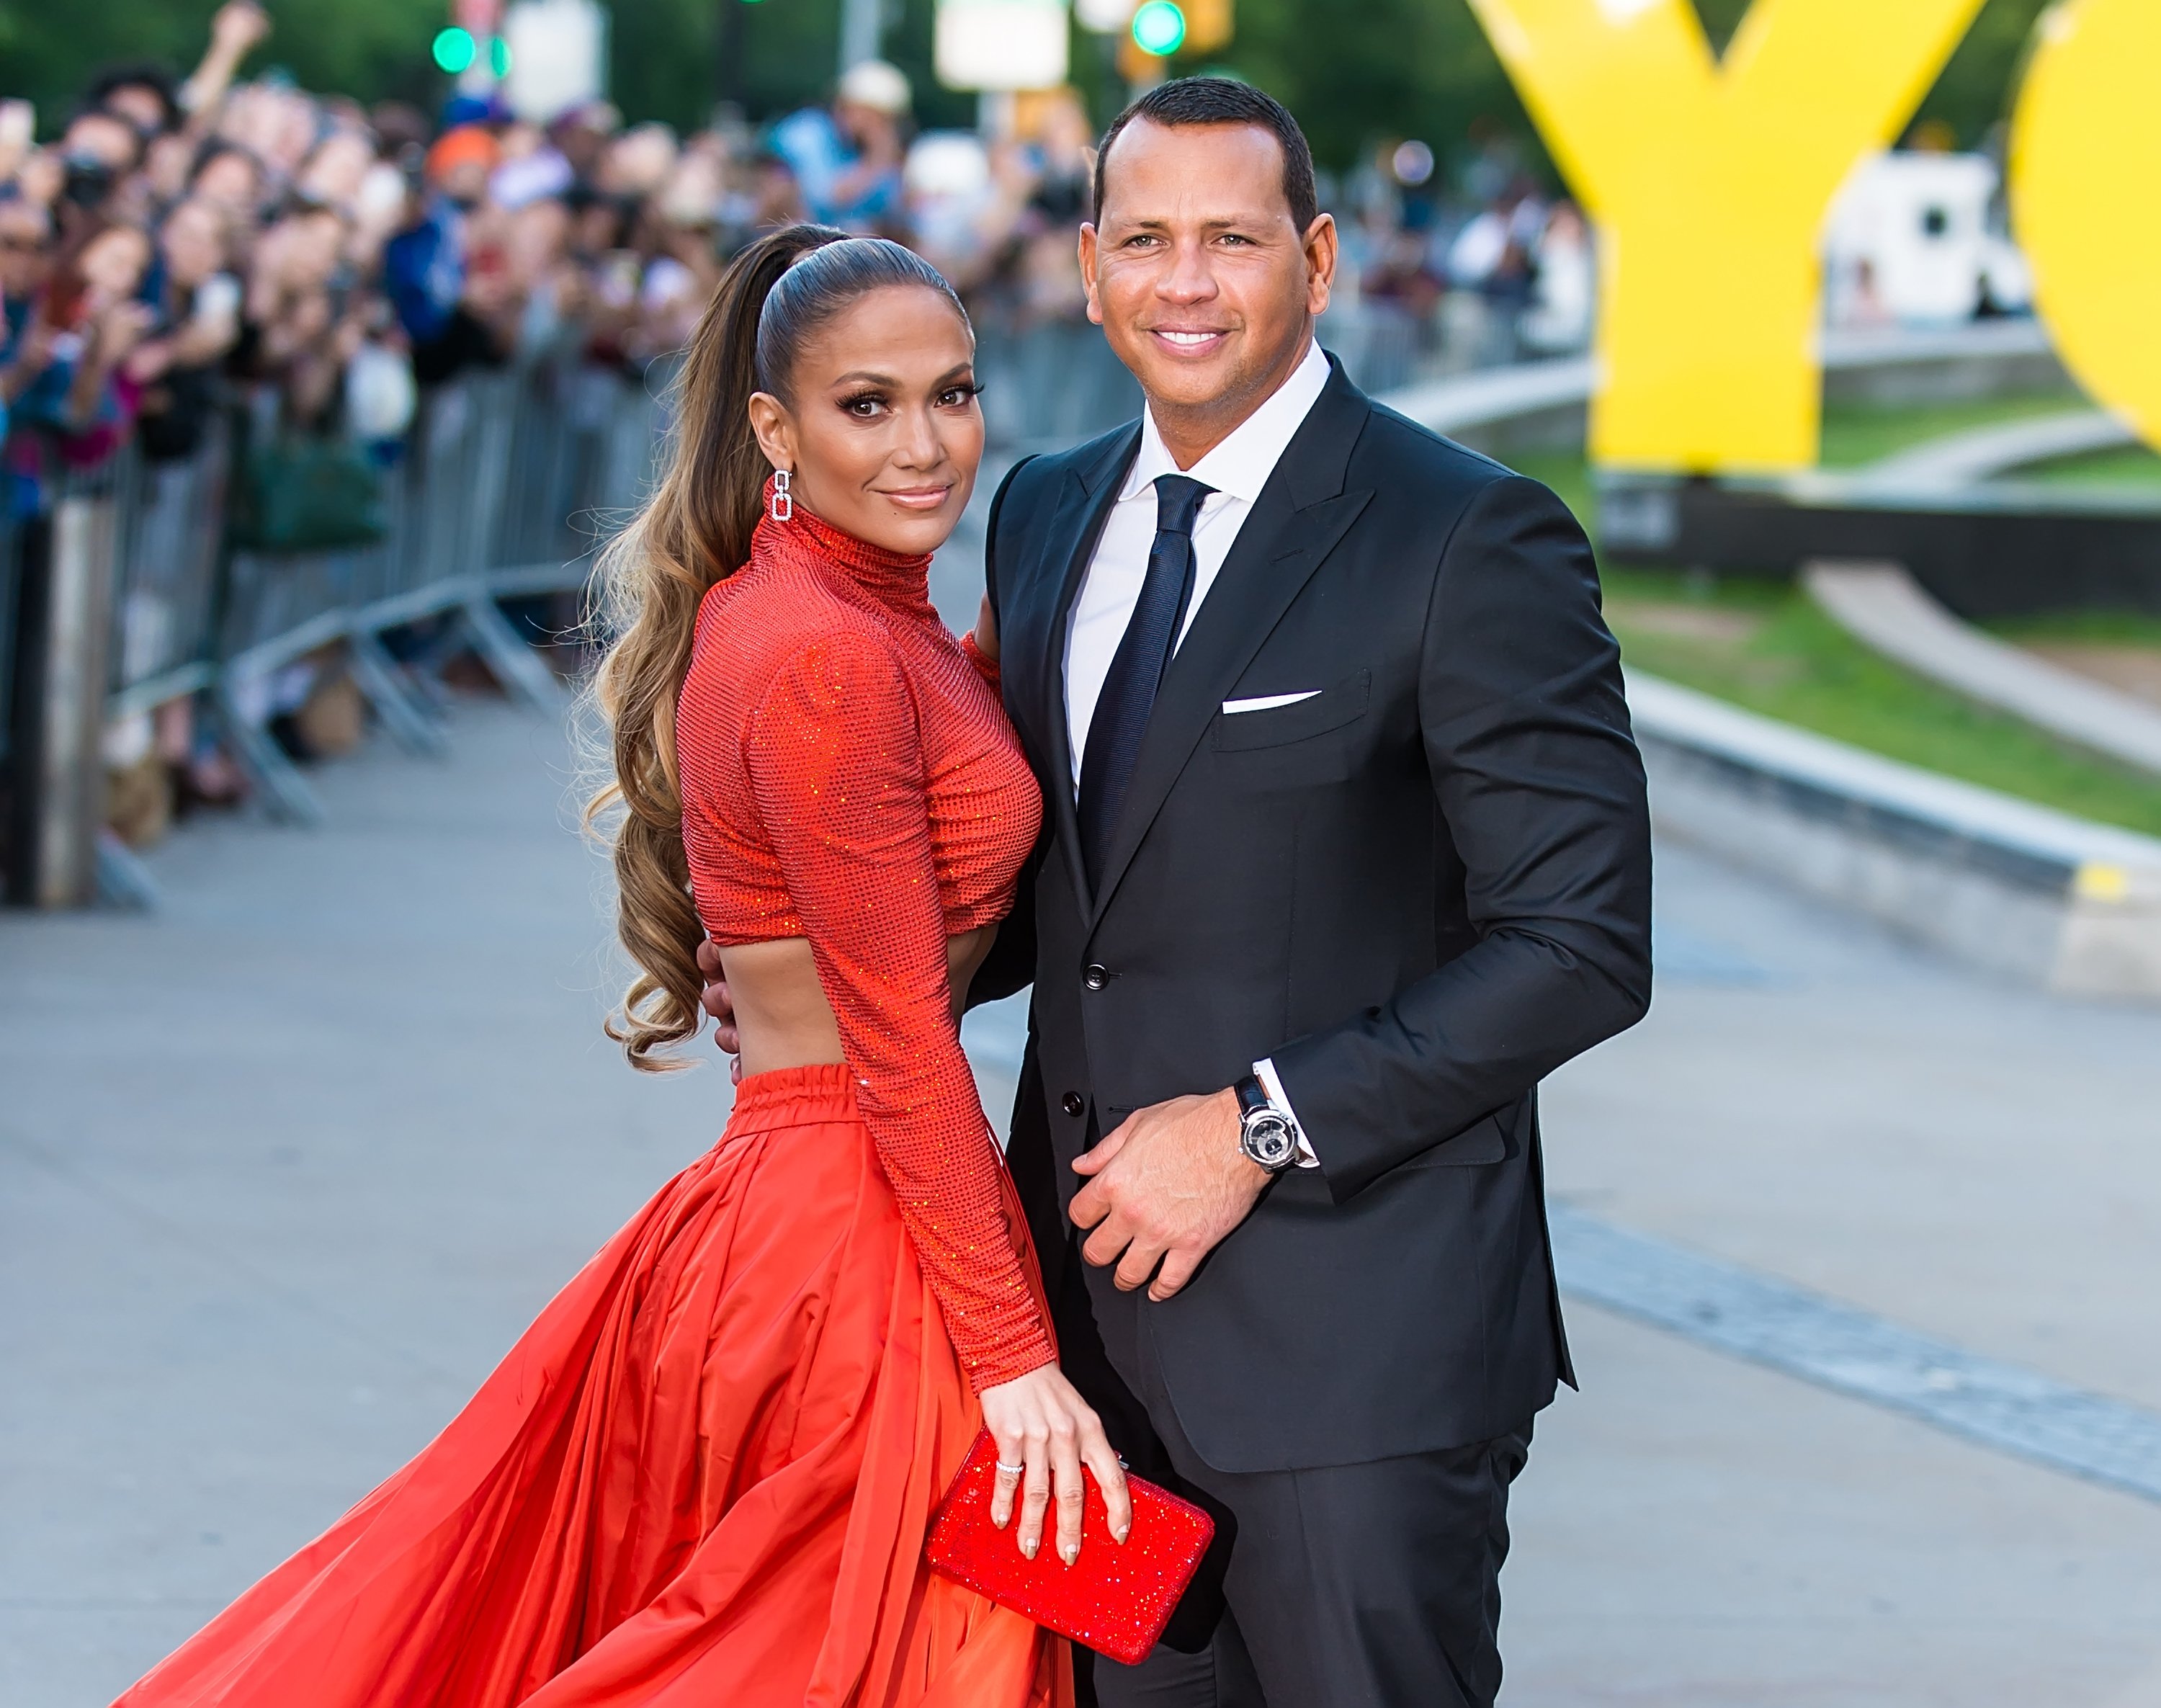  Jennifer Lopez and Alex Rodriguez are seen arriving to the 2019 CFDA Fashion Awards on June 3, 2019 | Photo: Getty Images